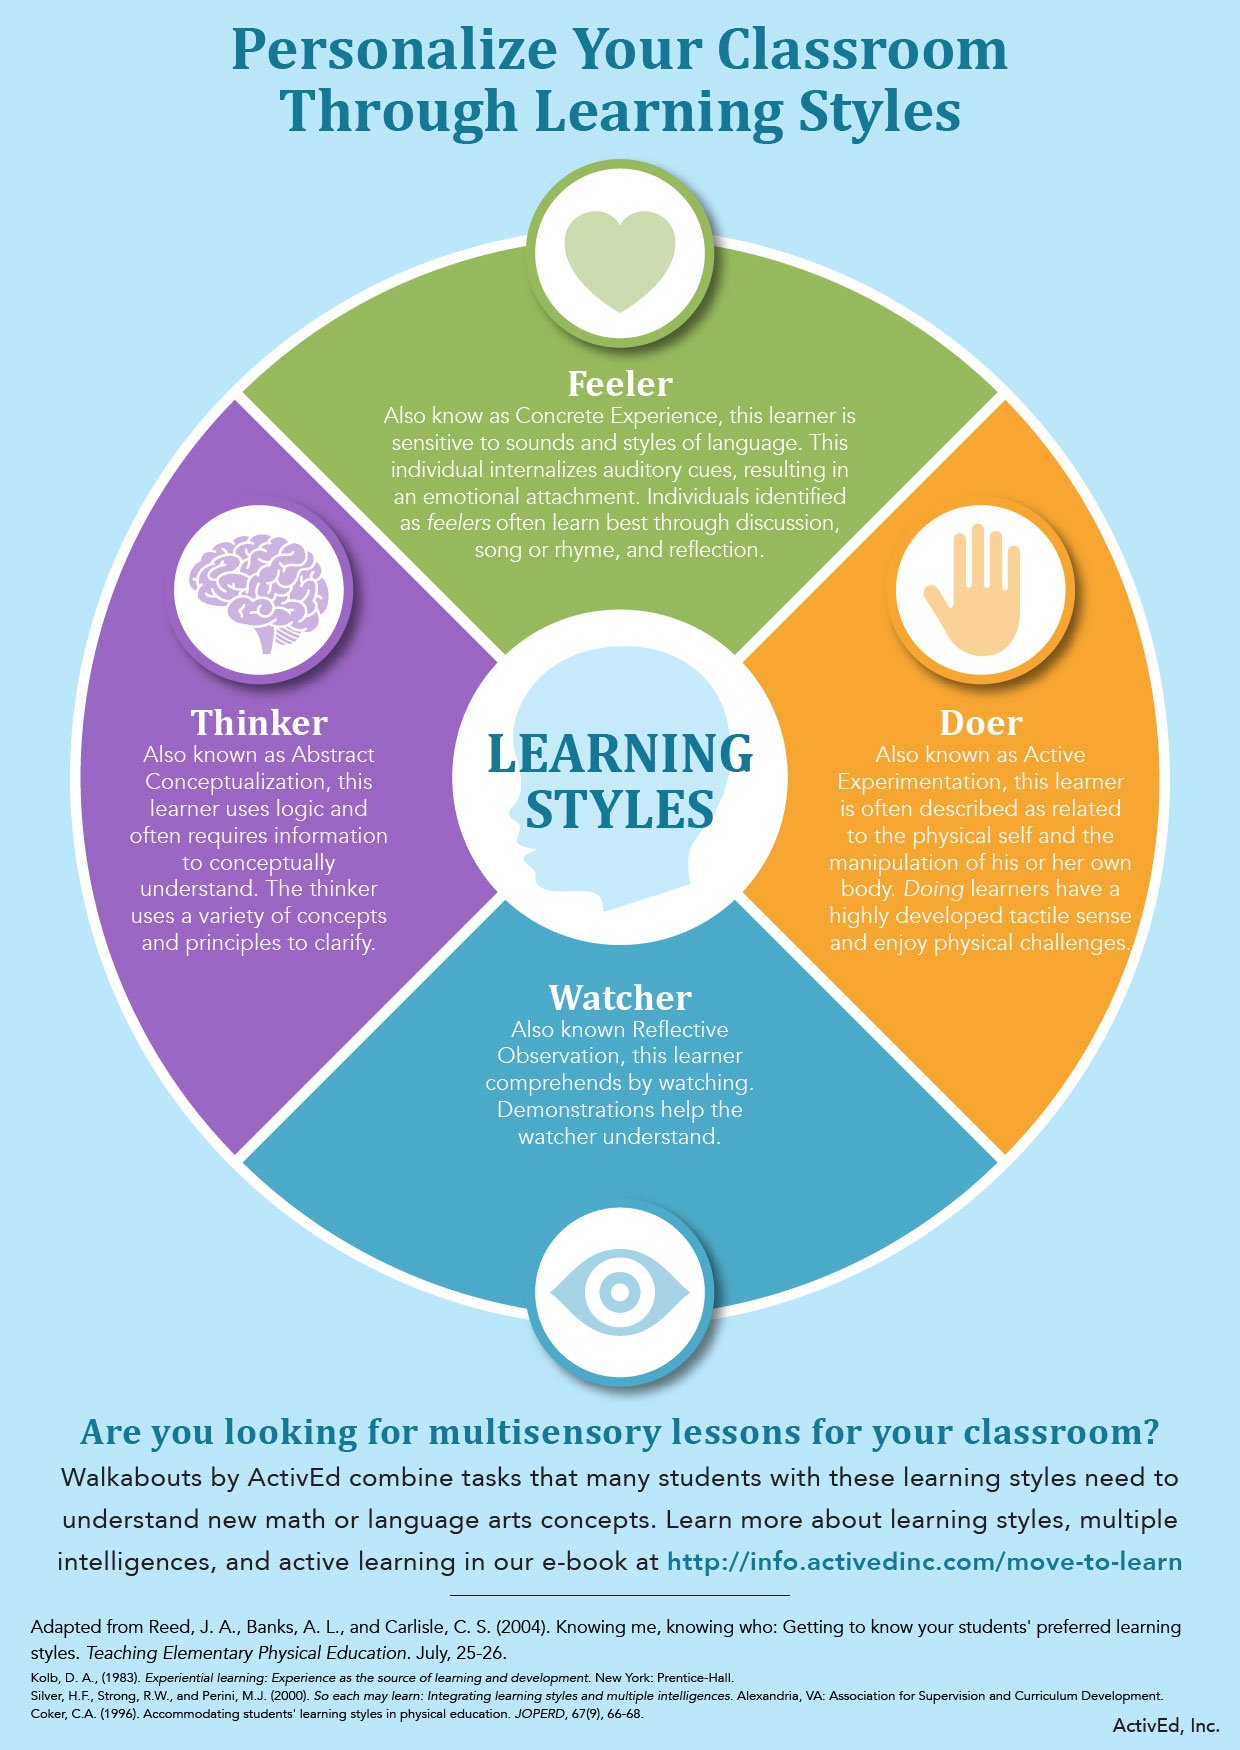 research study on learning styles